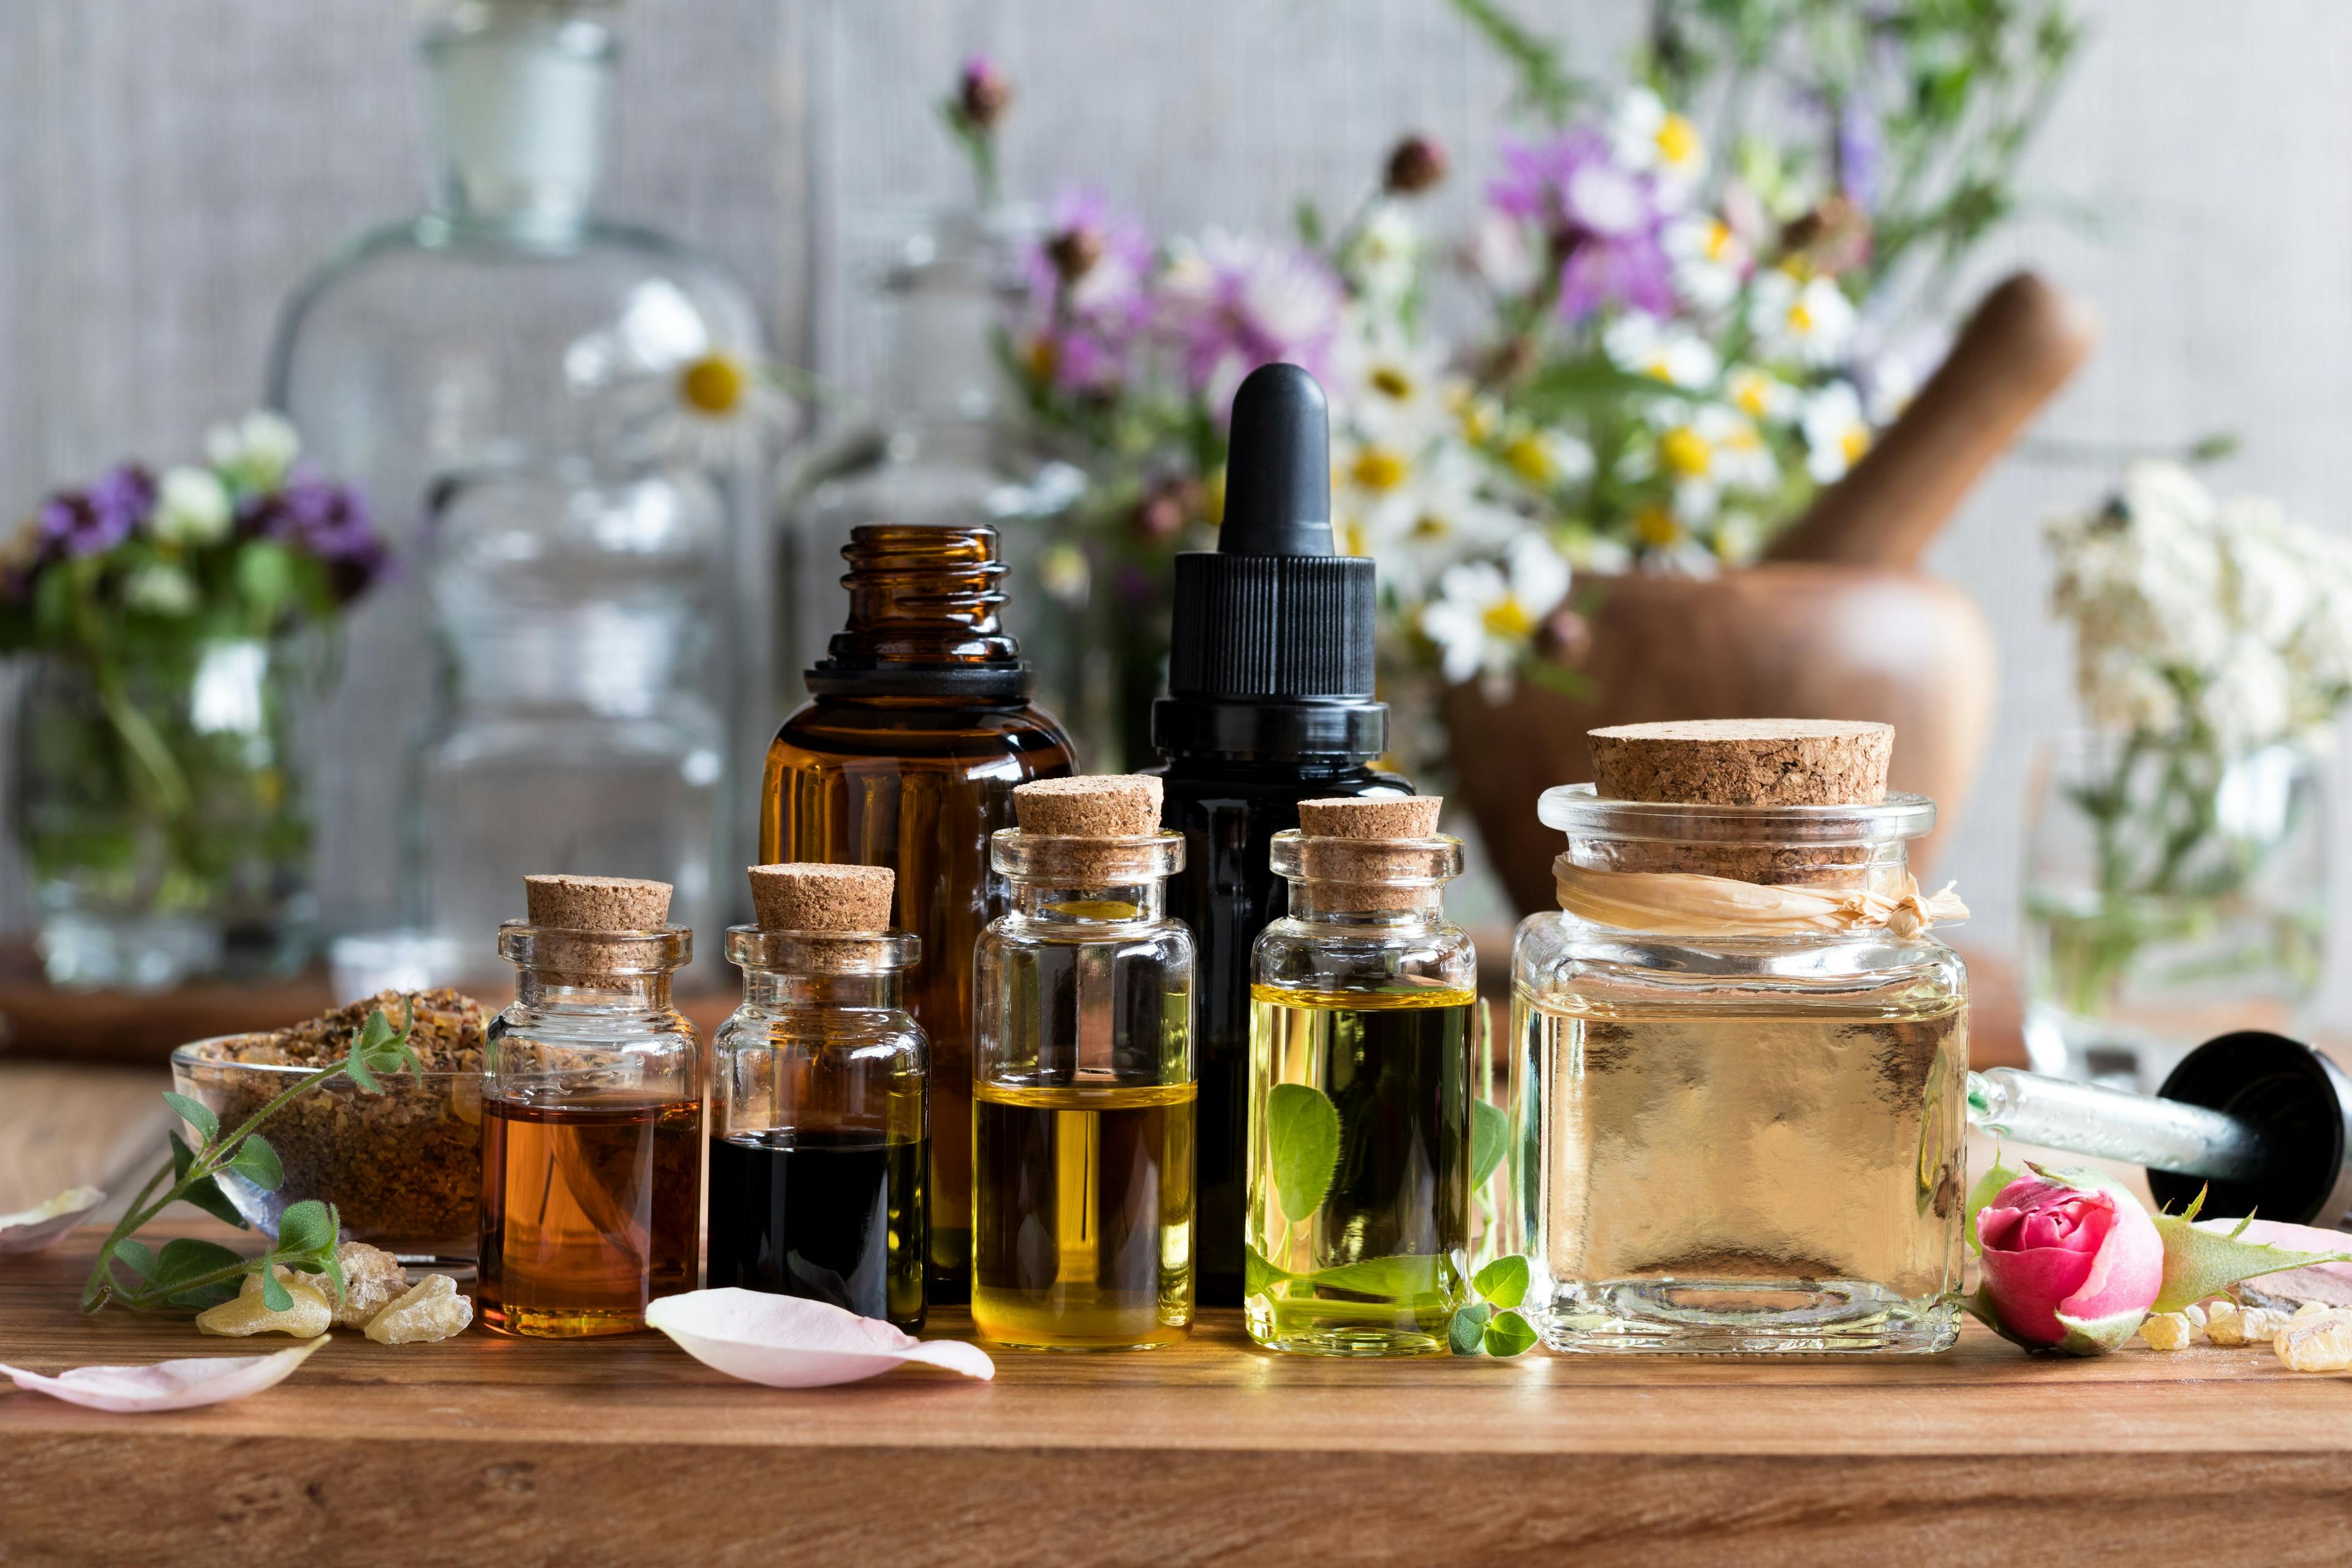 Selection of essential oils with herbs and flowers | Image Credit: © Madeleine Steinbach - stock.adobe.com